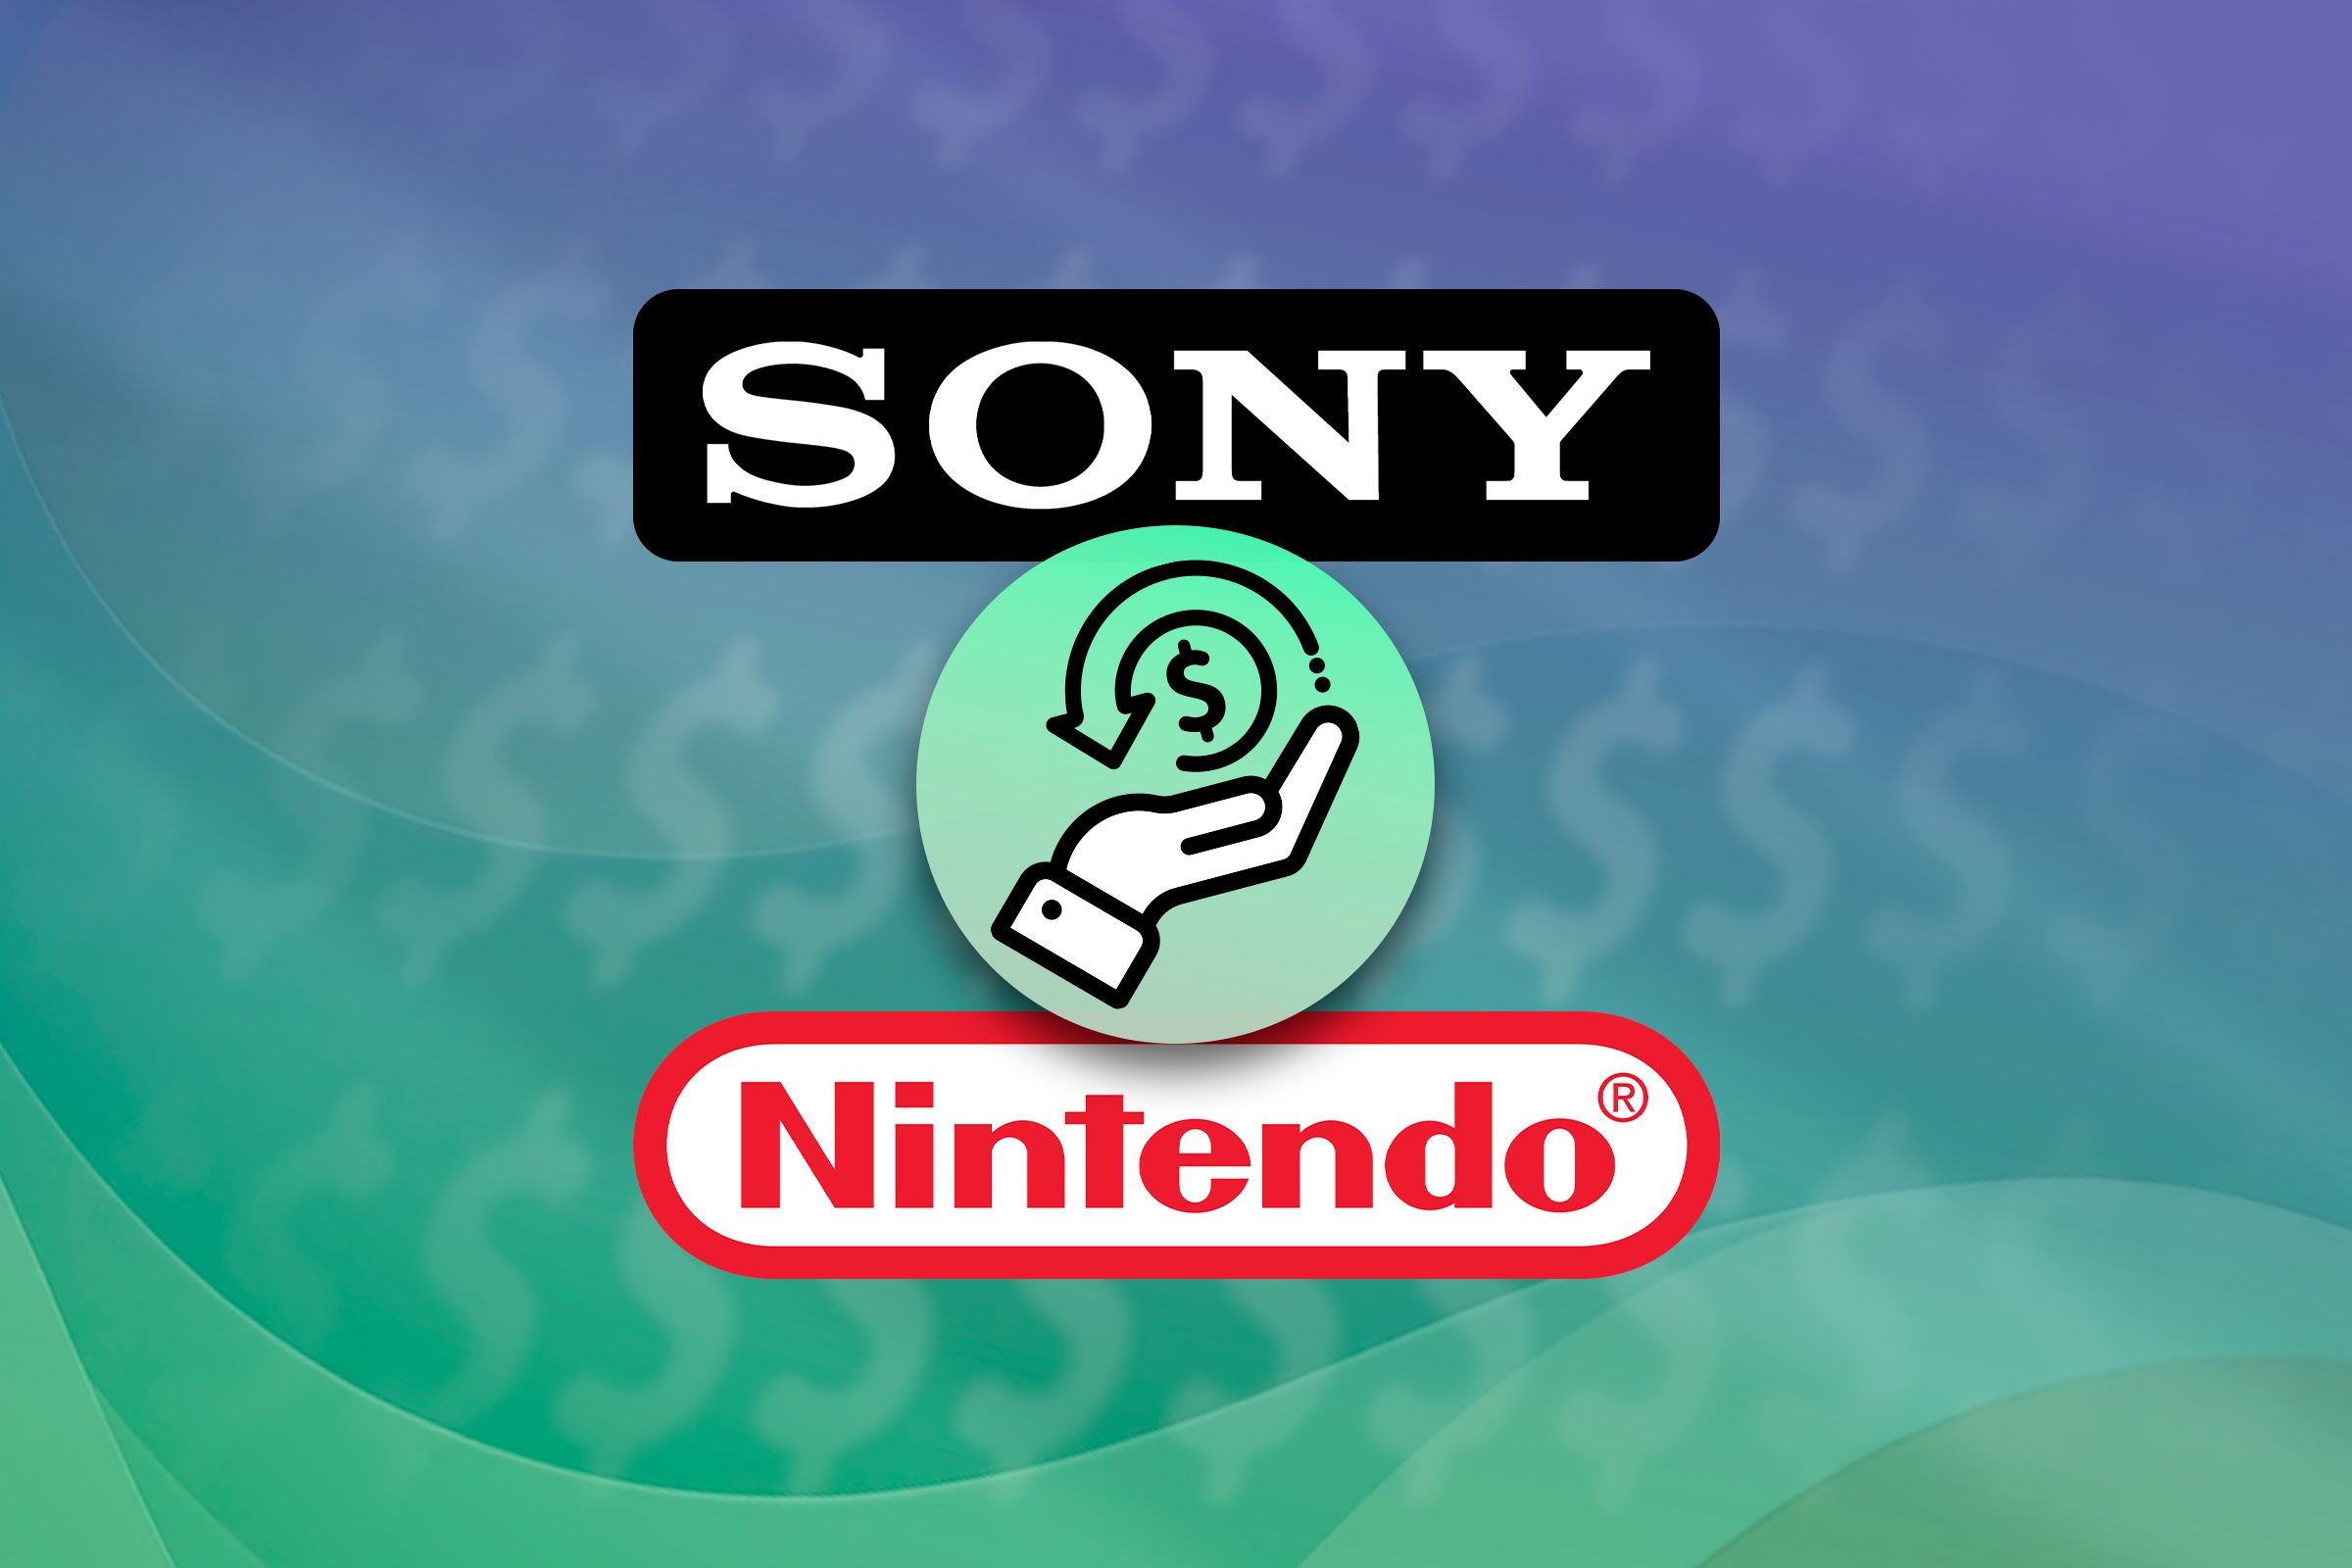 Sony logo at the top and Nintendo logo at the bottom with a refund icon in the middle.